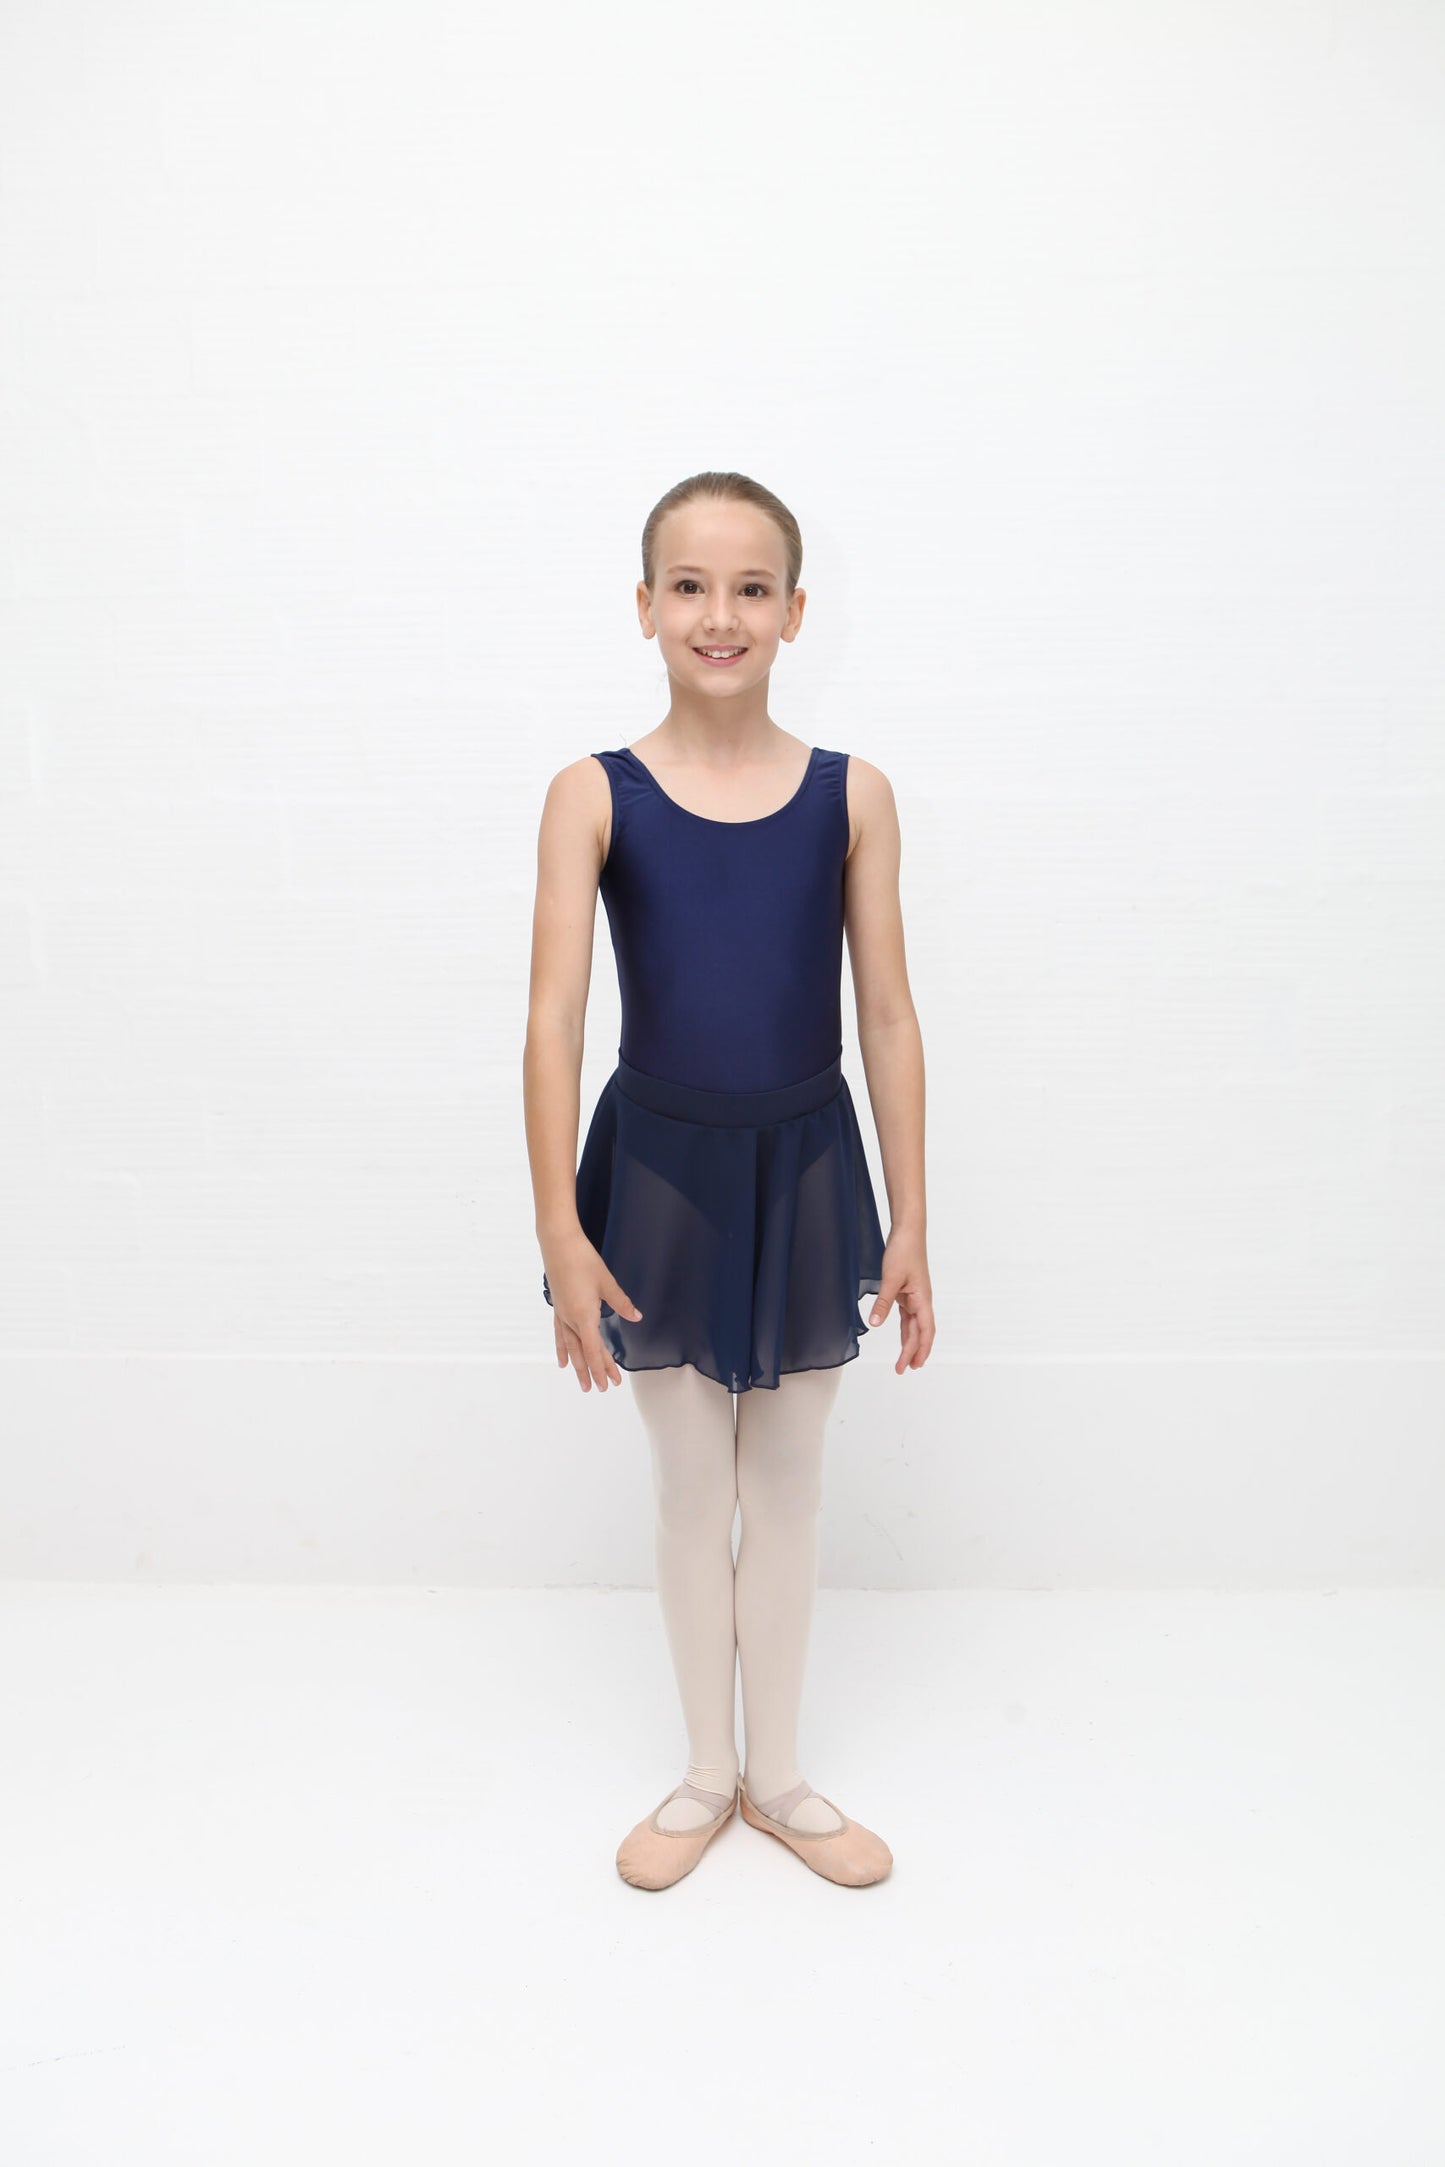 Leotard, skirt, shoes and ballet tights